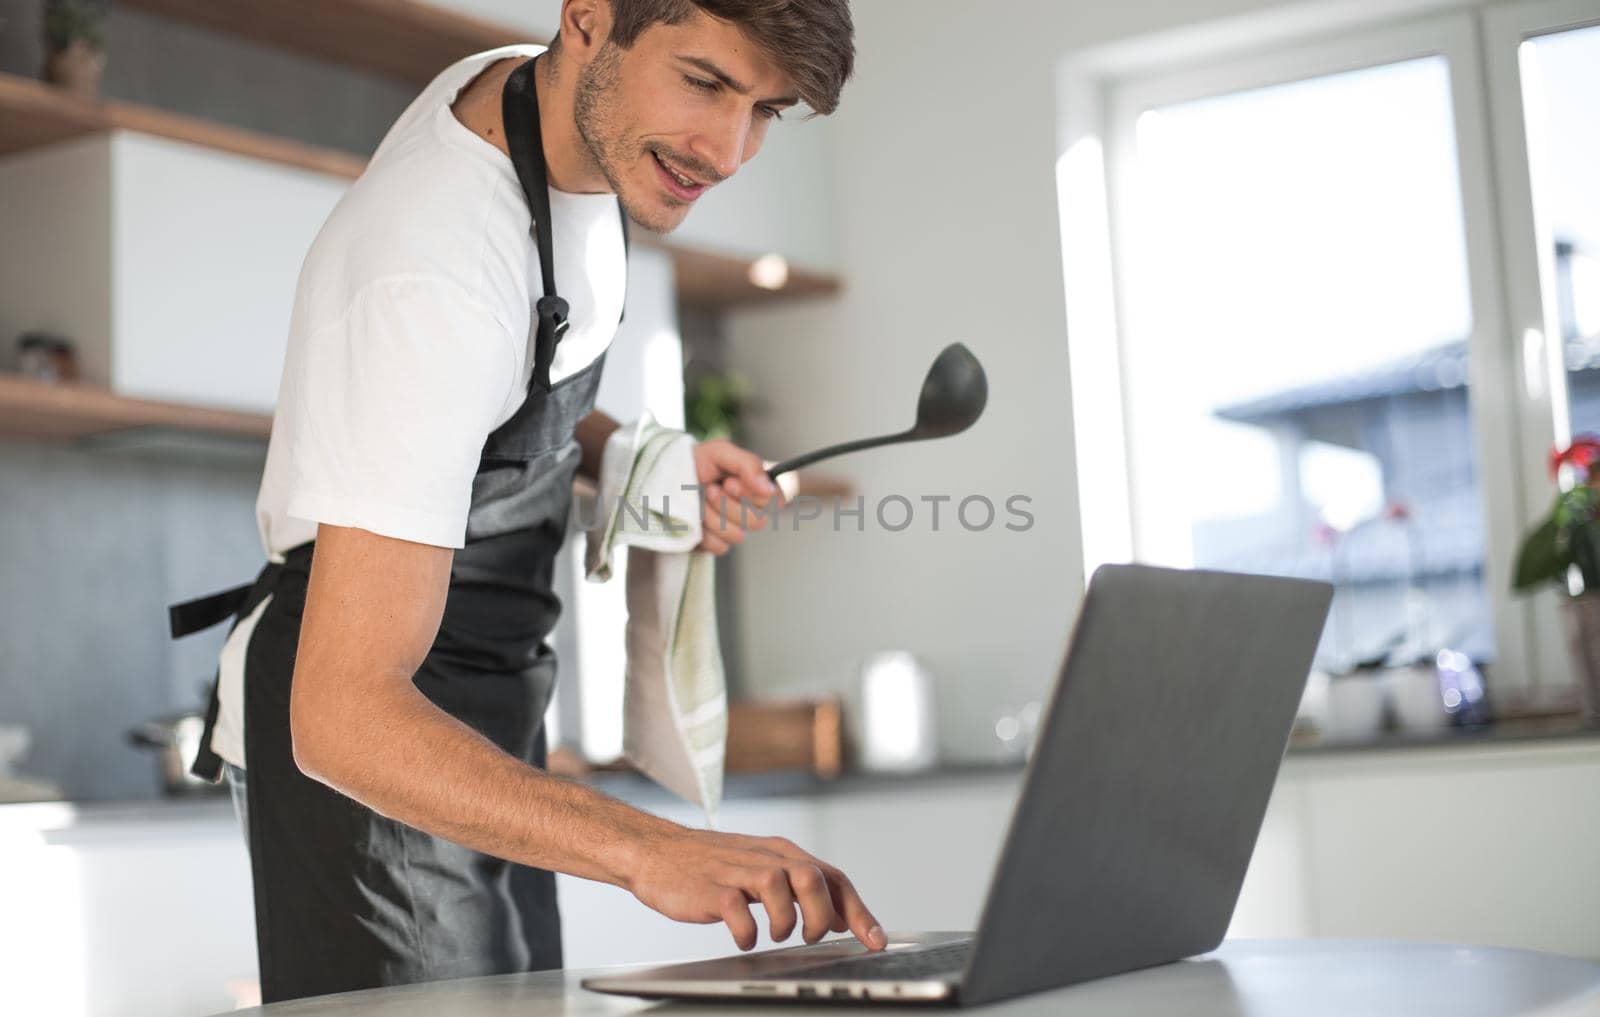 young man looking at laptop screen while cooking dinner by asdf